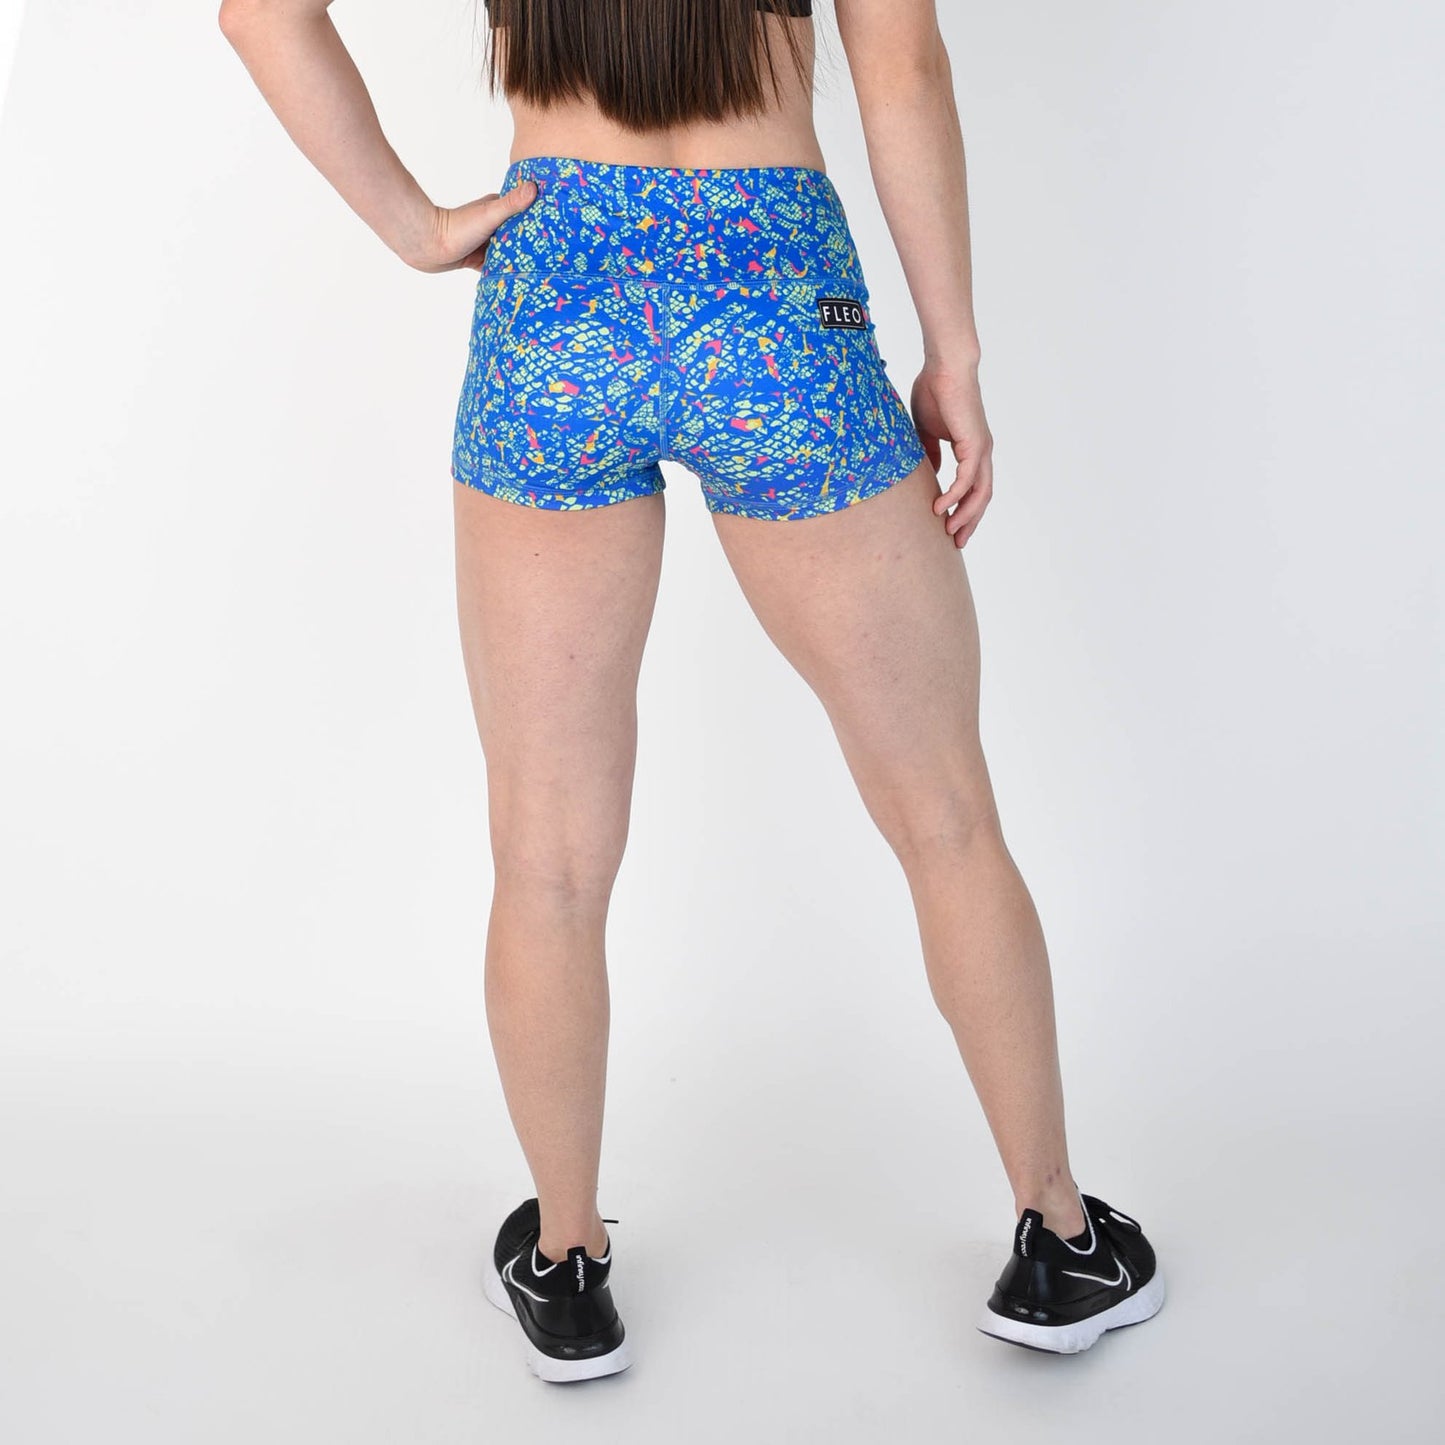 FLEO Cold Blooded Shorts (High-rise Original) - 9 for 9